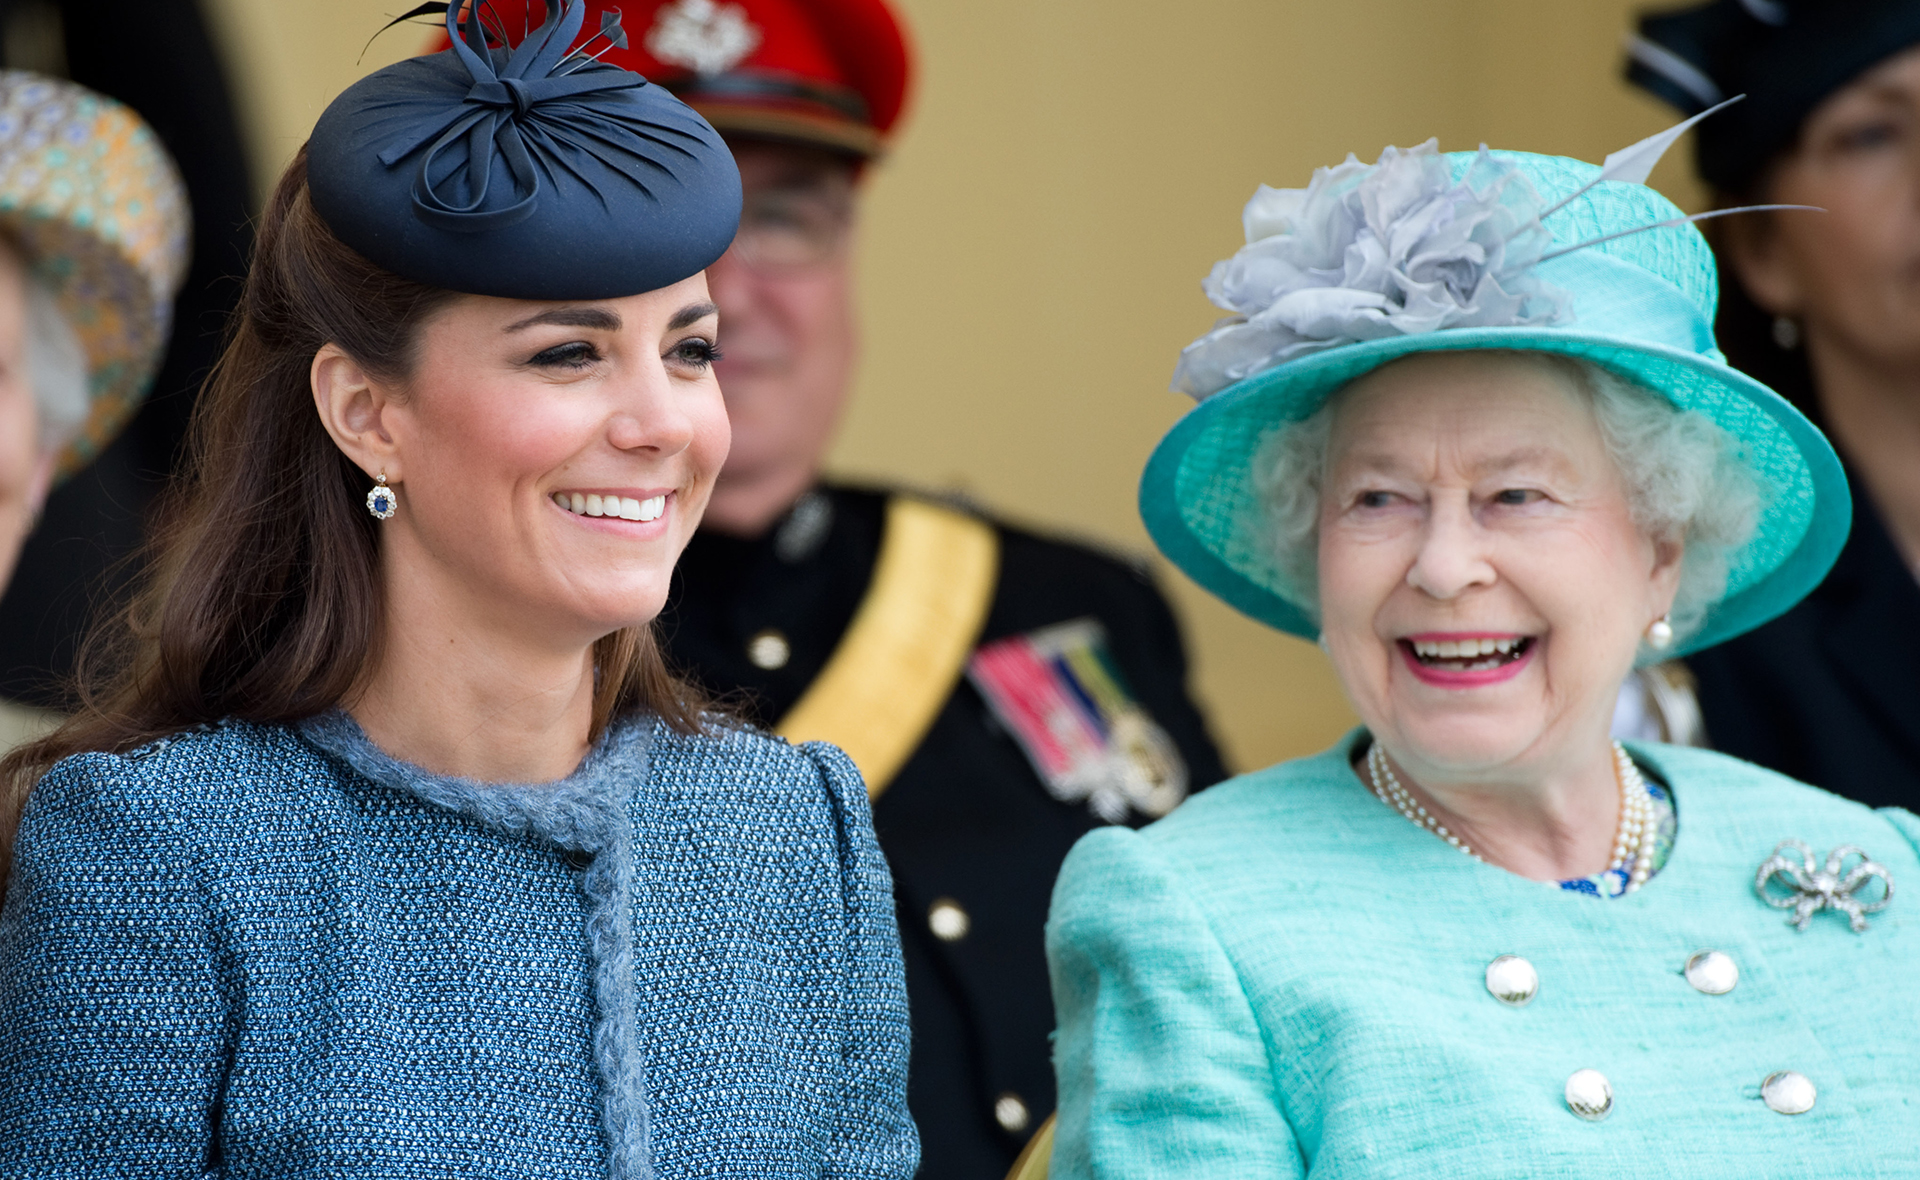 She’s born to rule! Why the Queen is so proud of “magnificent” Kate Middleton